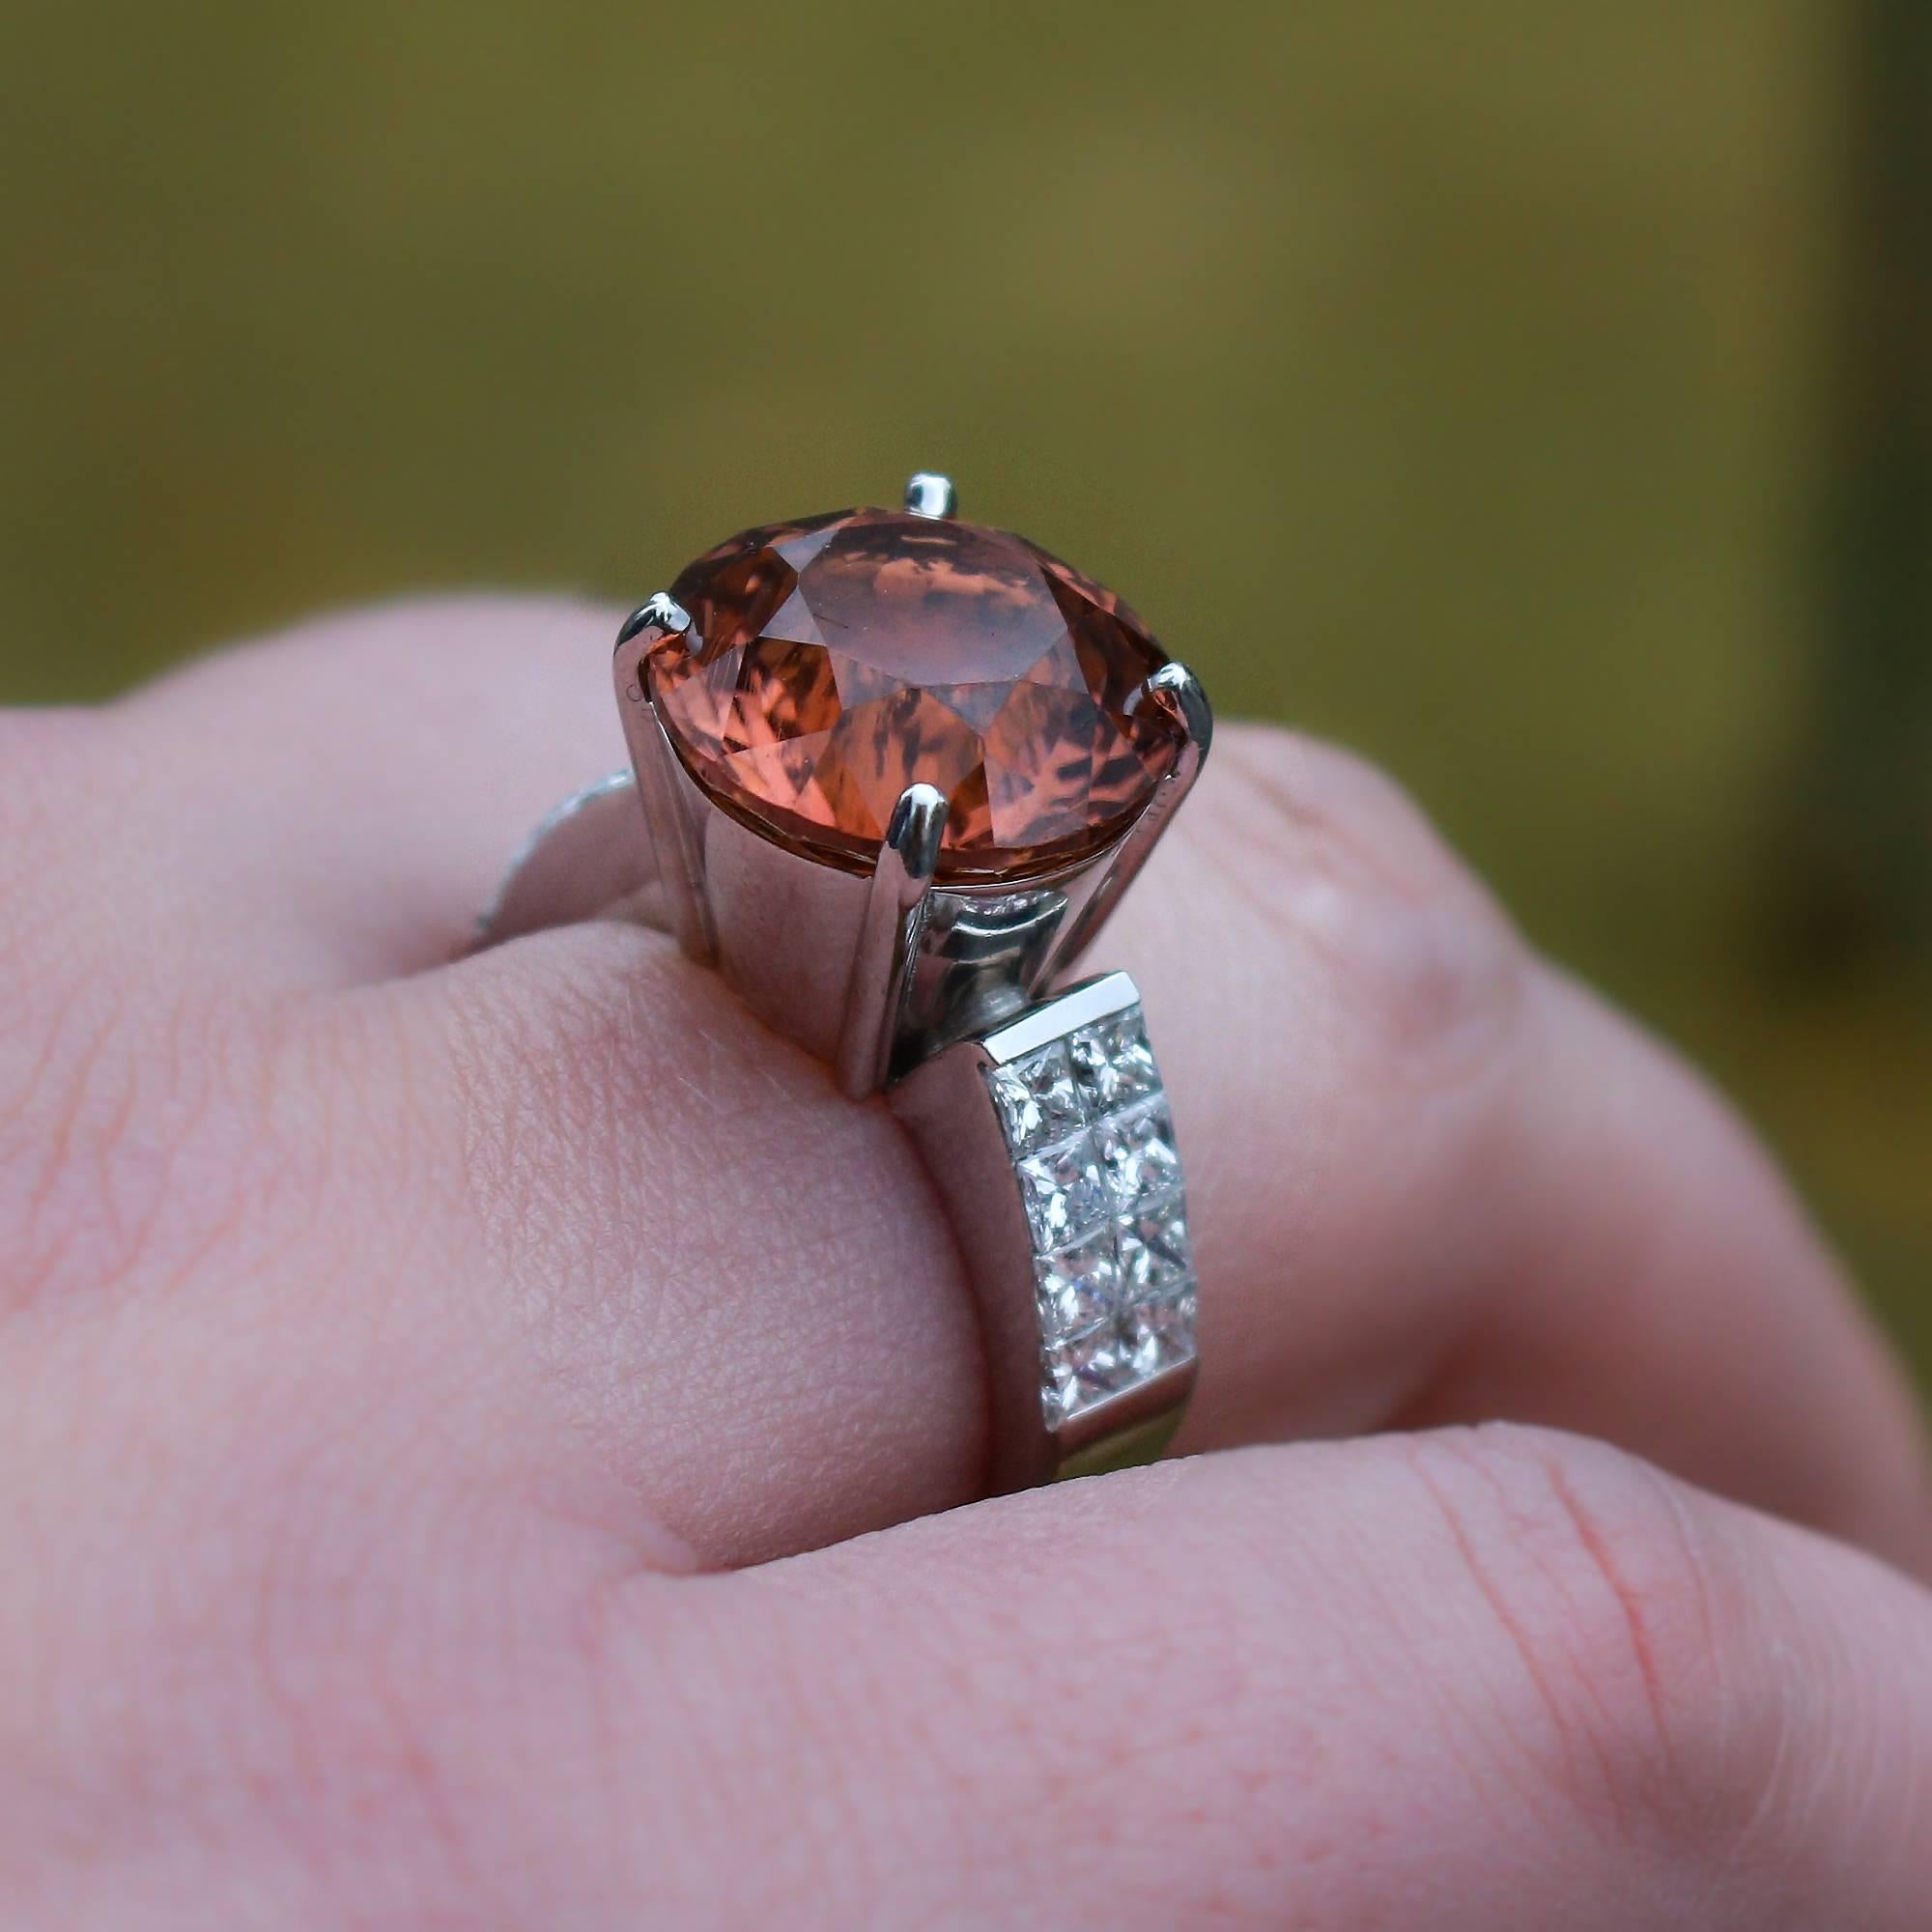 This fabulous ring centers a round tourmaline that weighs approximately 7.15ct and displays a beautifully unique strong pinkish orange color. It is set in a 18k white gold and diamond setting with 16 princess cut diamonds, which weigh approximately